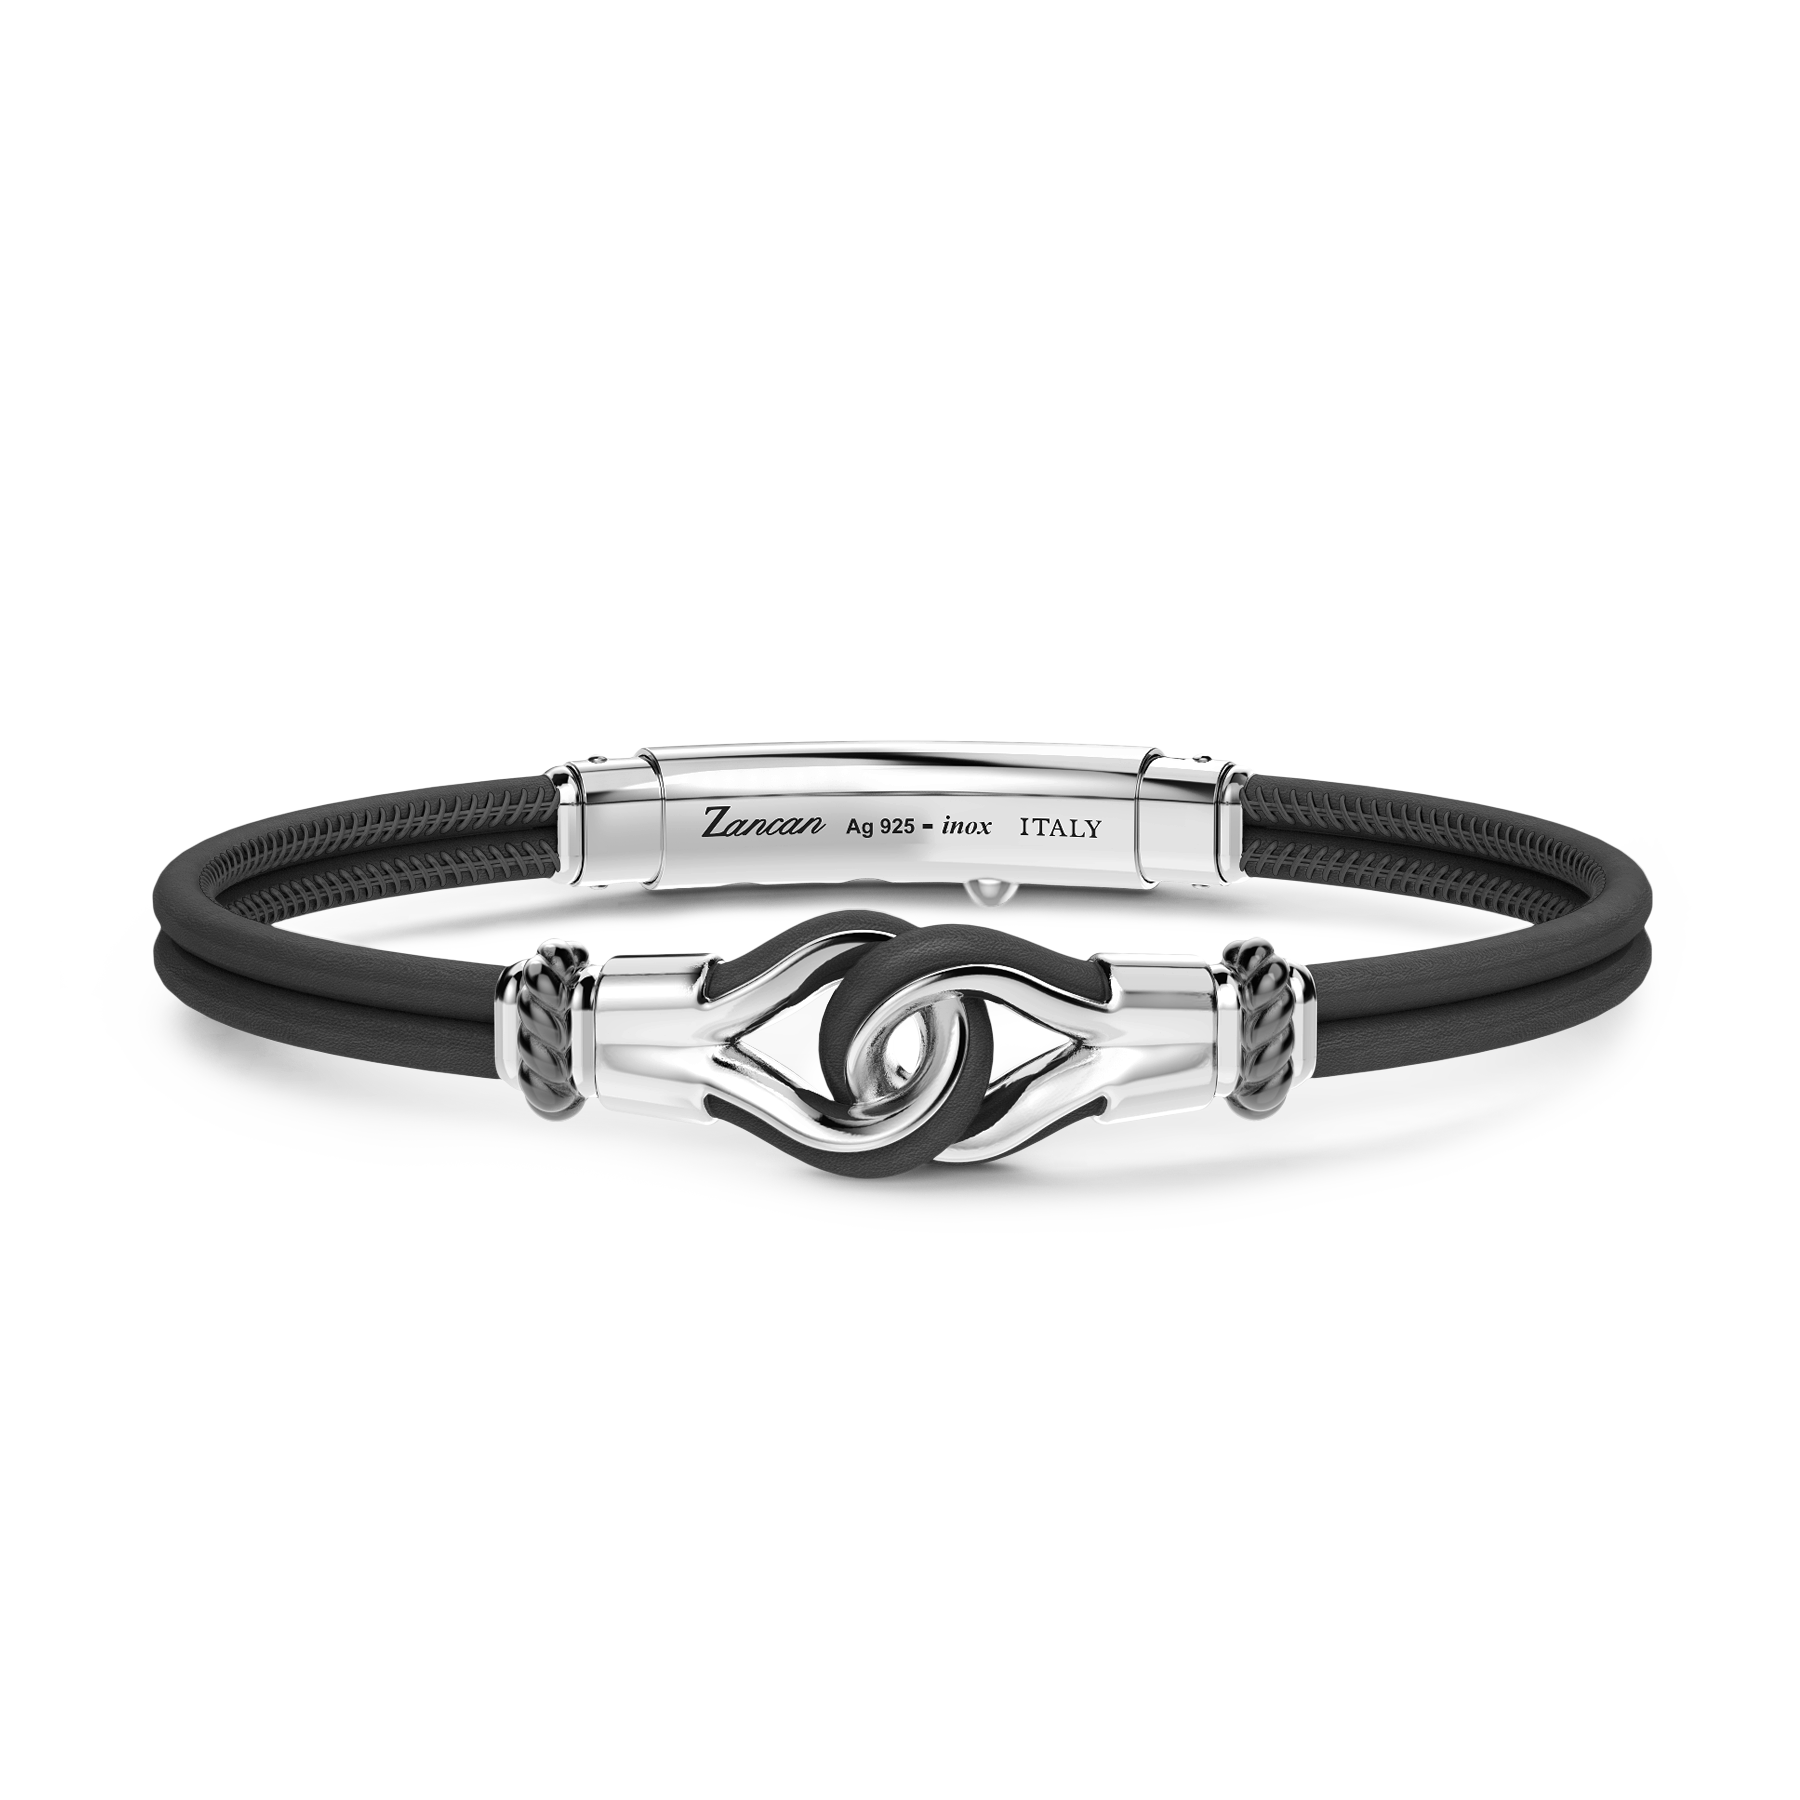 Expertly crafted in Italy, the Zancan Black Leather Sterling Silver Bracelet features a 2" nautical knot of sterling silver with a rhodium coating. The 8" long bracelet is customizable with an adjustable slide lock. Navigate in style with this timeless piece.